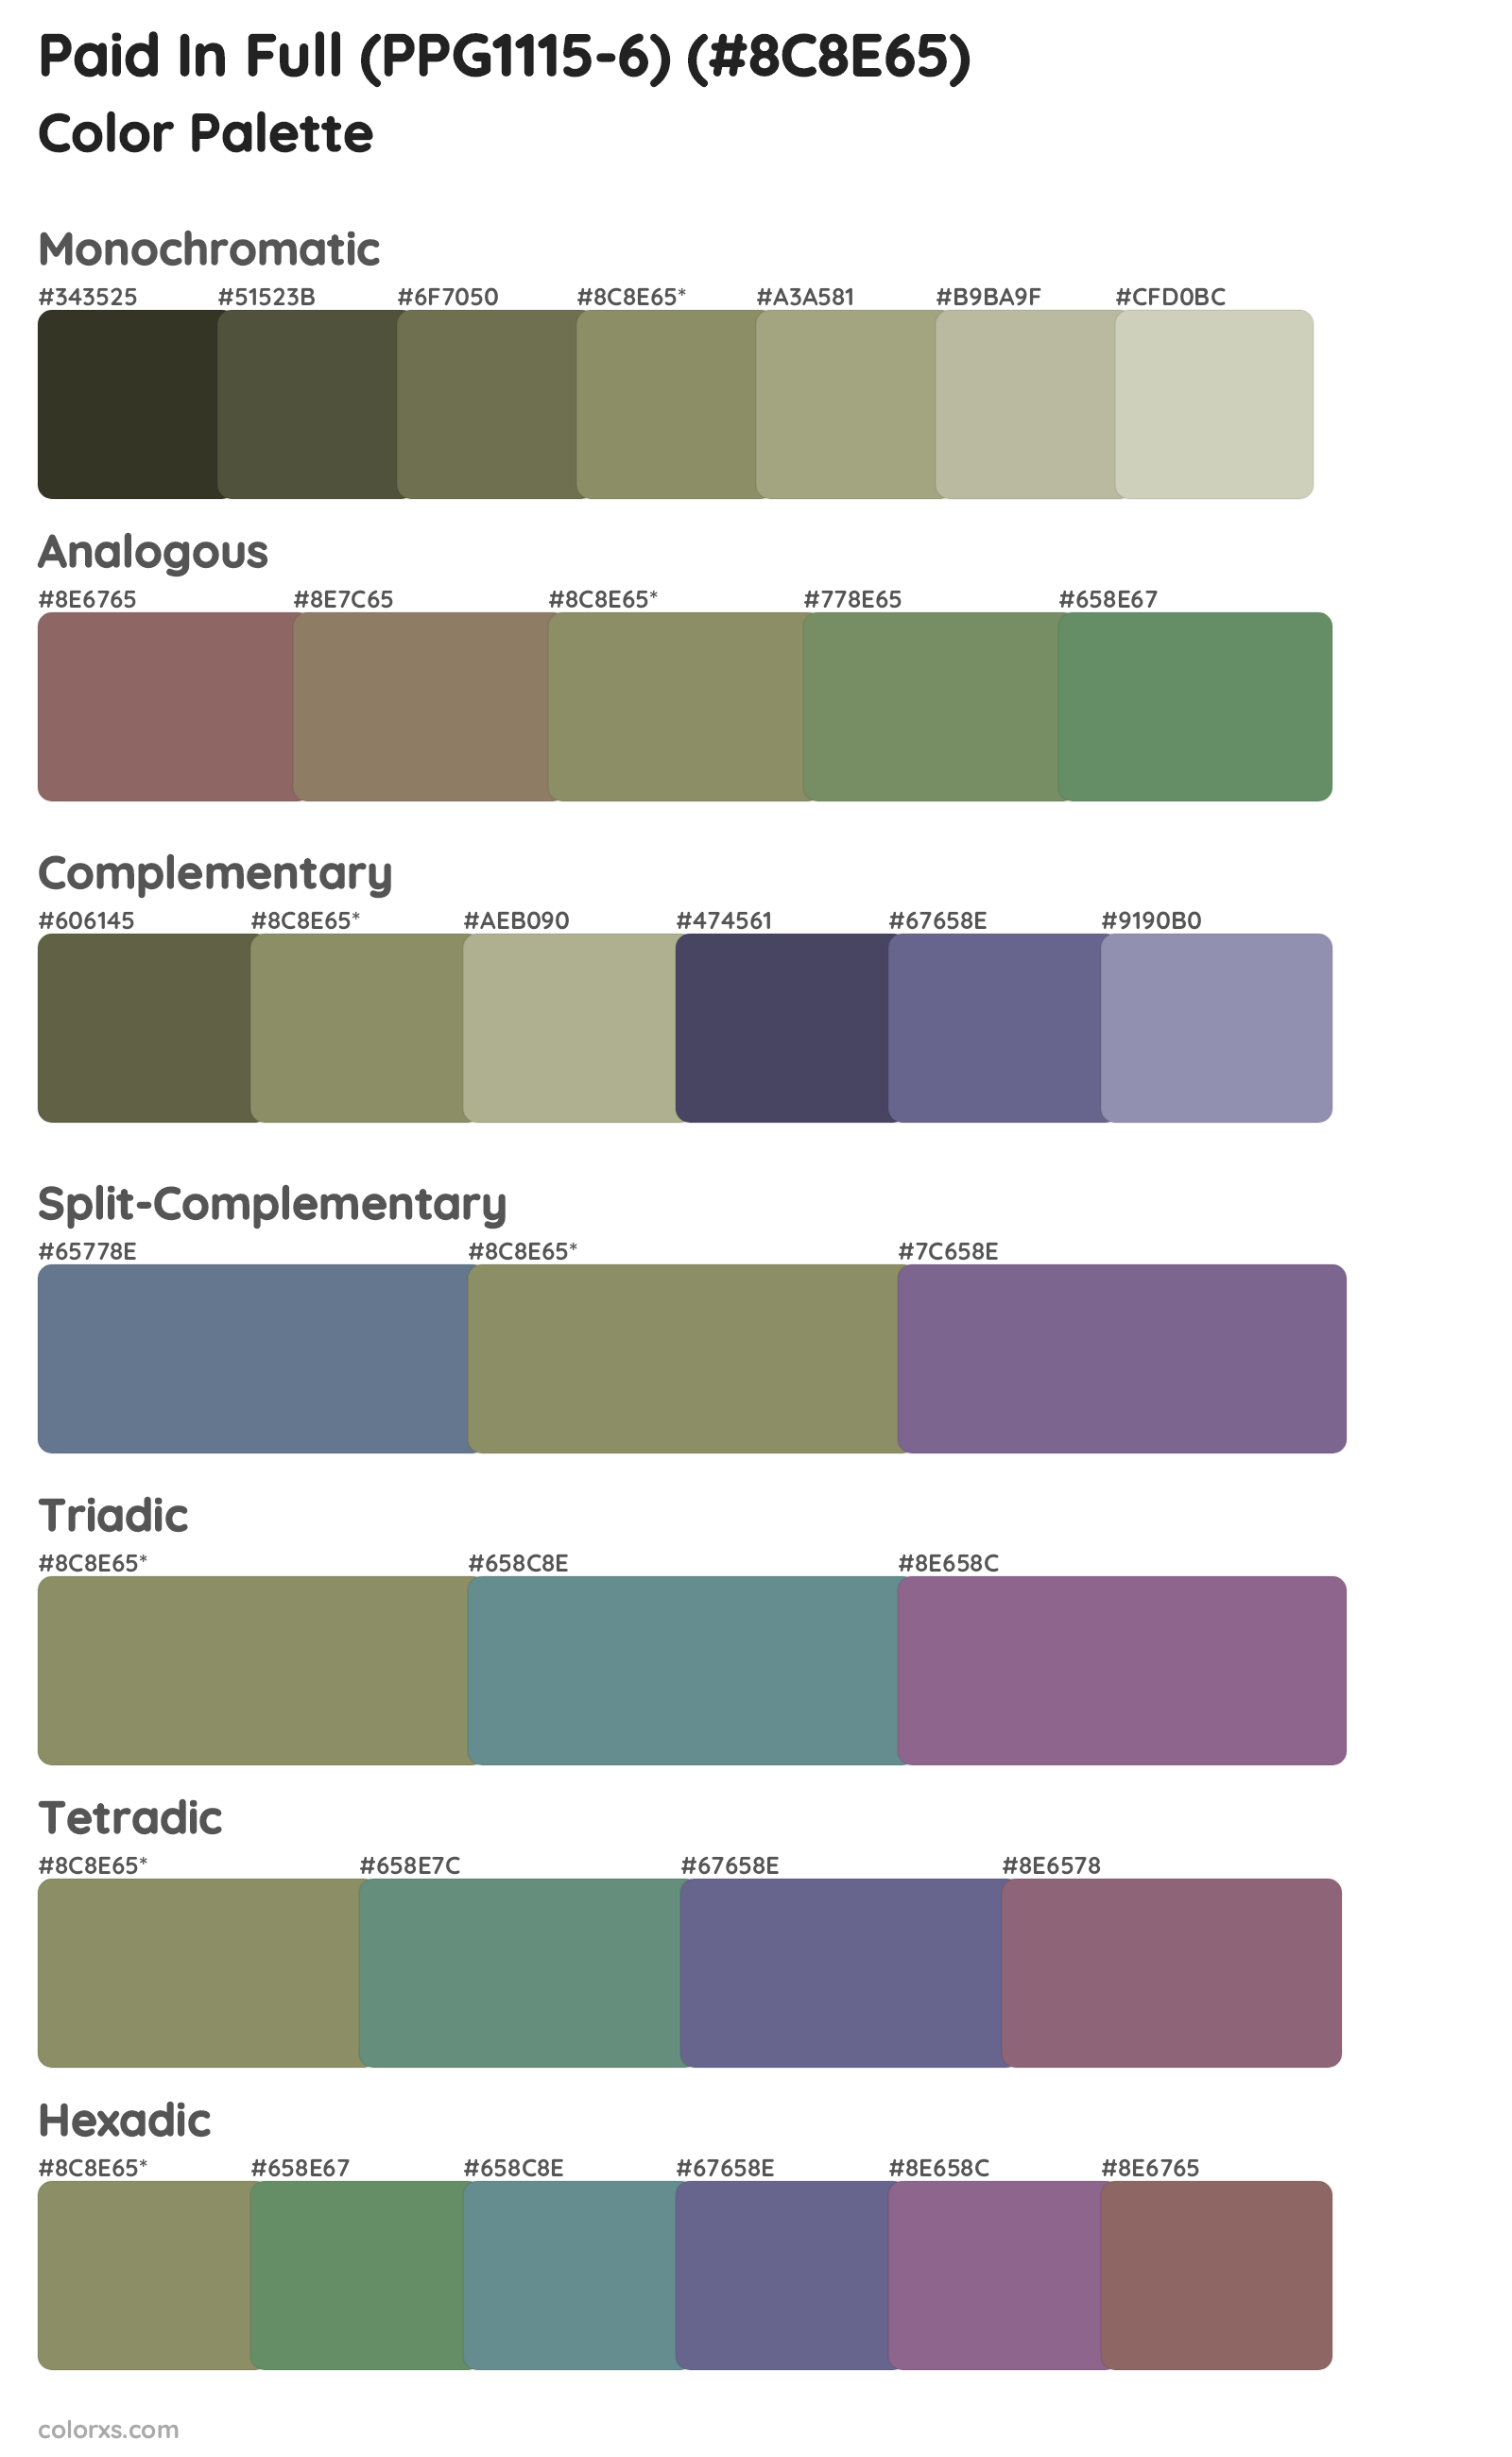 Paid In Full (PPG1115-6) Color Scheme Palettes